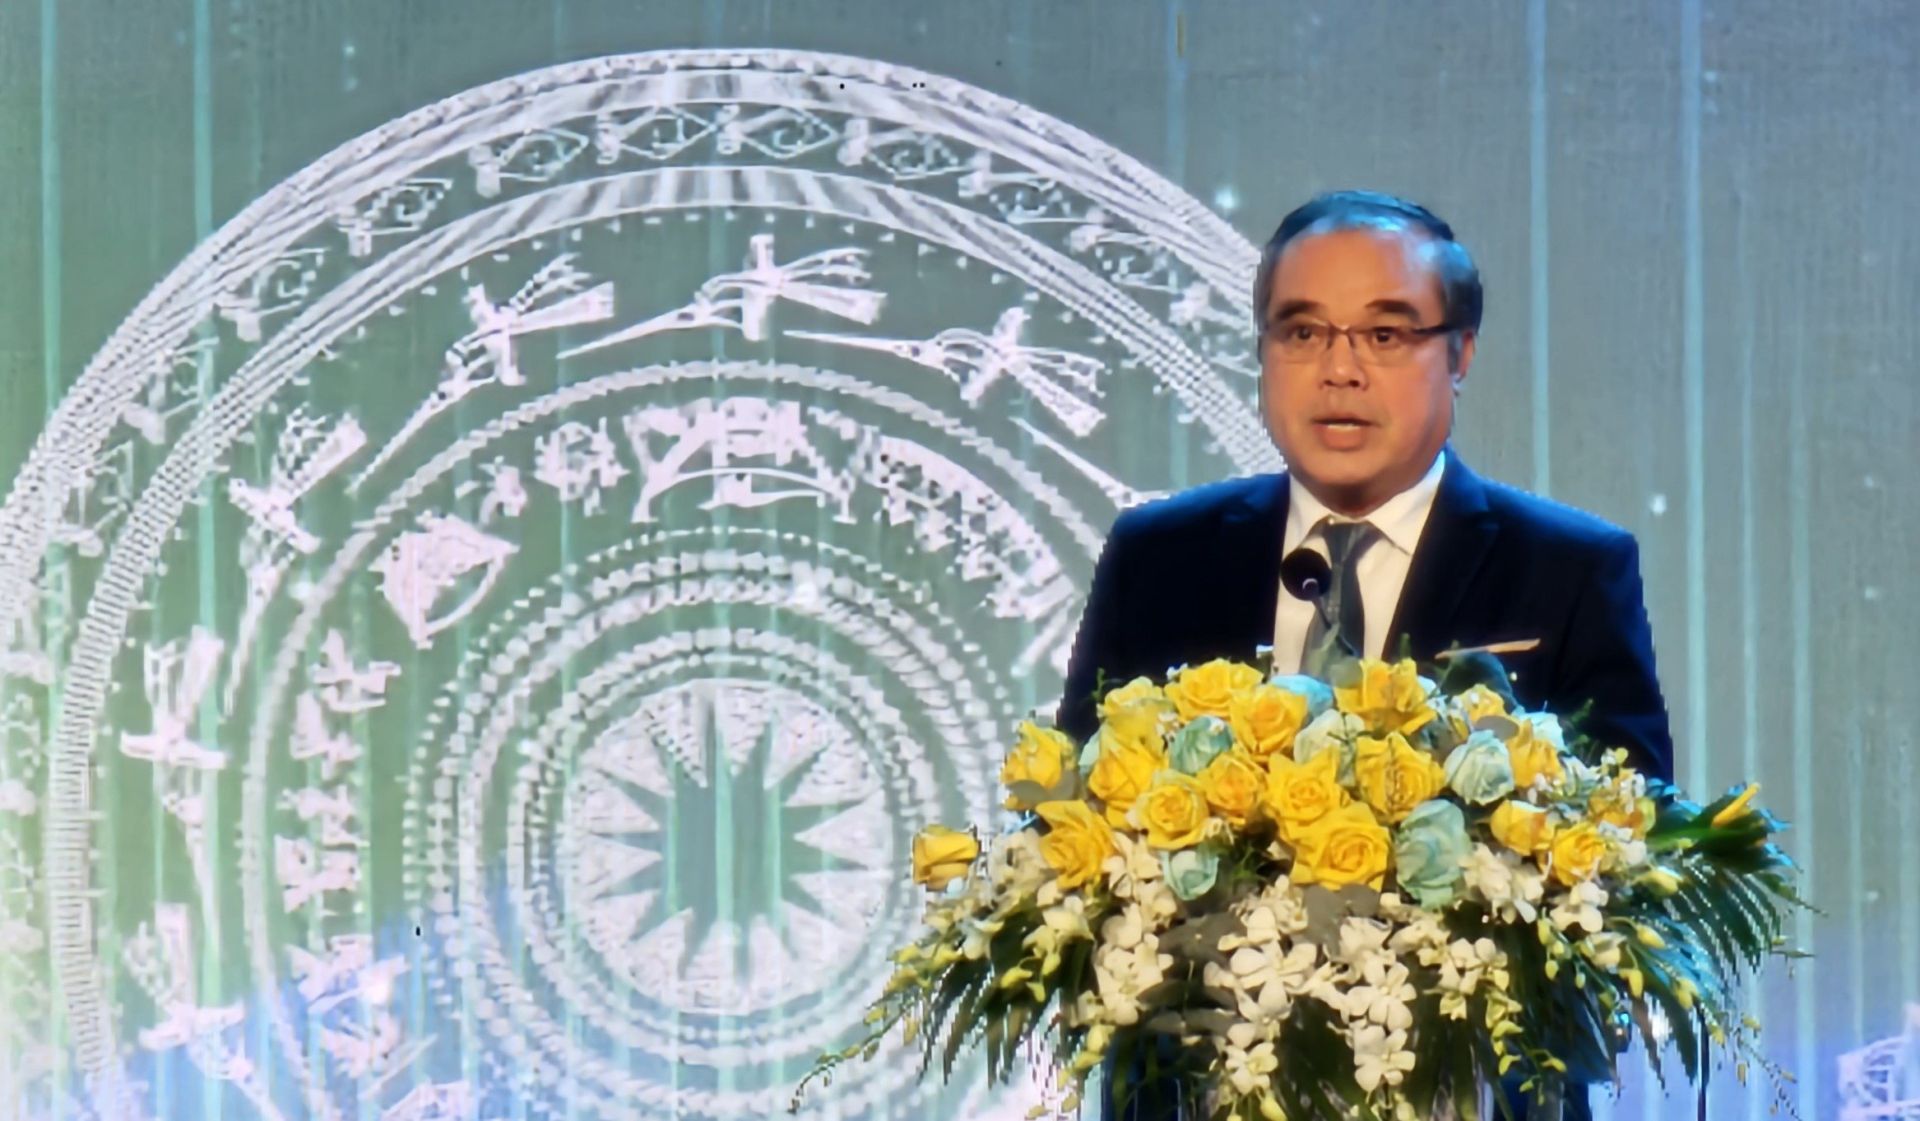 Mr Tran Hoang Tuan, Vice Chairman of the Quang Ngai Provincial People's Committee spoke at the ceremony